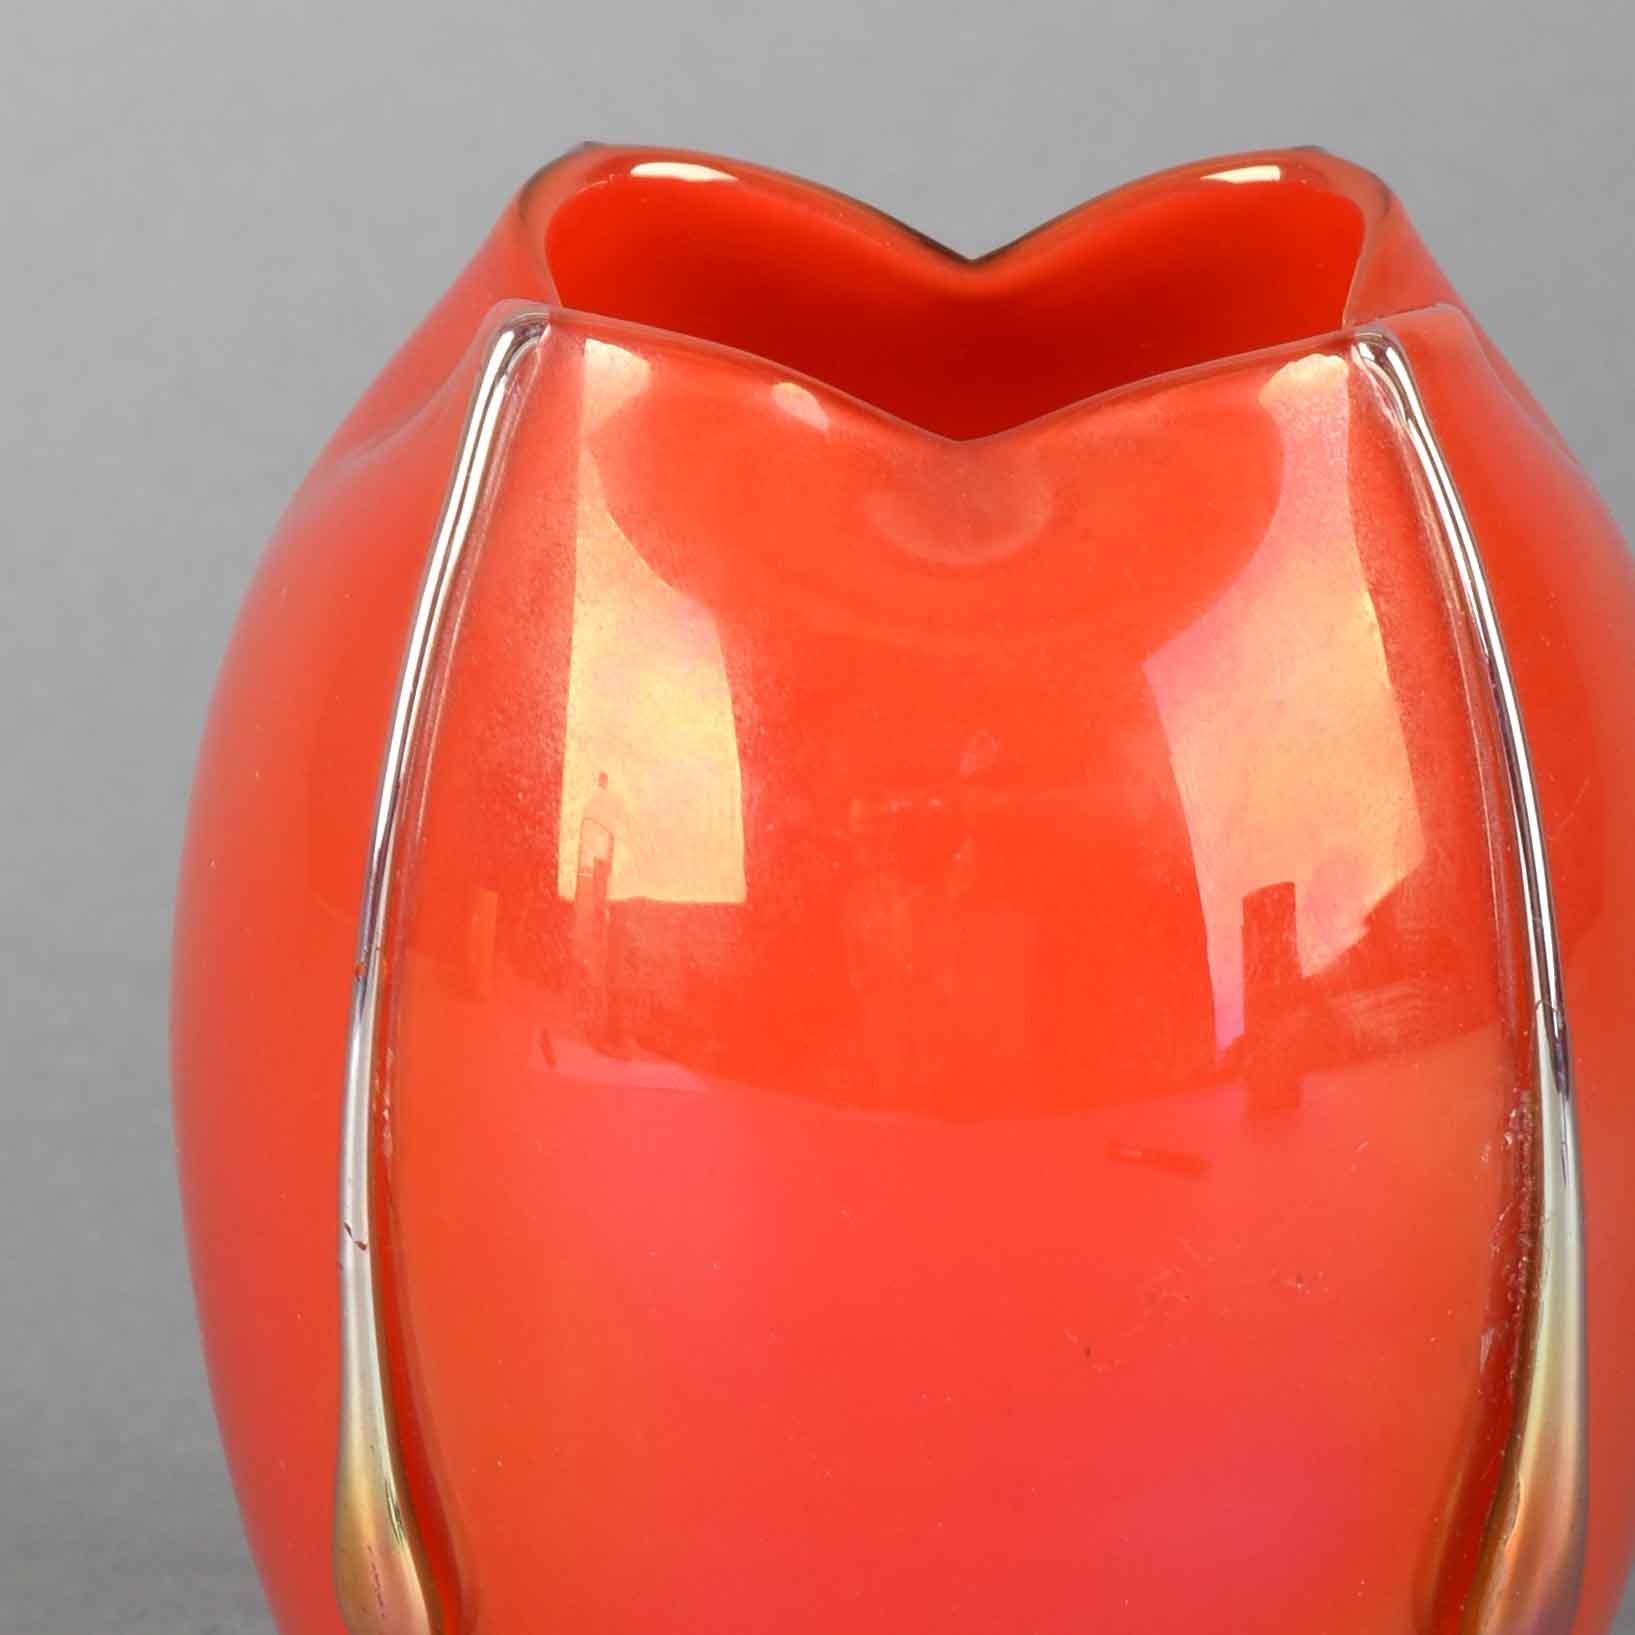 Jugendstil vase is an original decorative object realized, circa 1925.

Original orange glass realized by Johann Lötz Witwe. Beautiful orange vase decorated with molten glass drops irised.

Johann Lötz Witwe was a Bohemian (currently the Czech